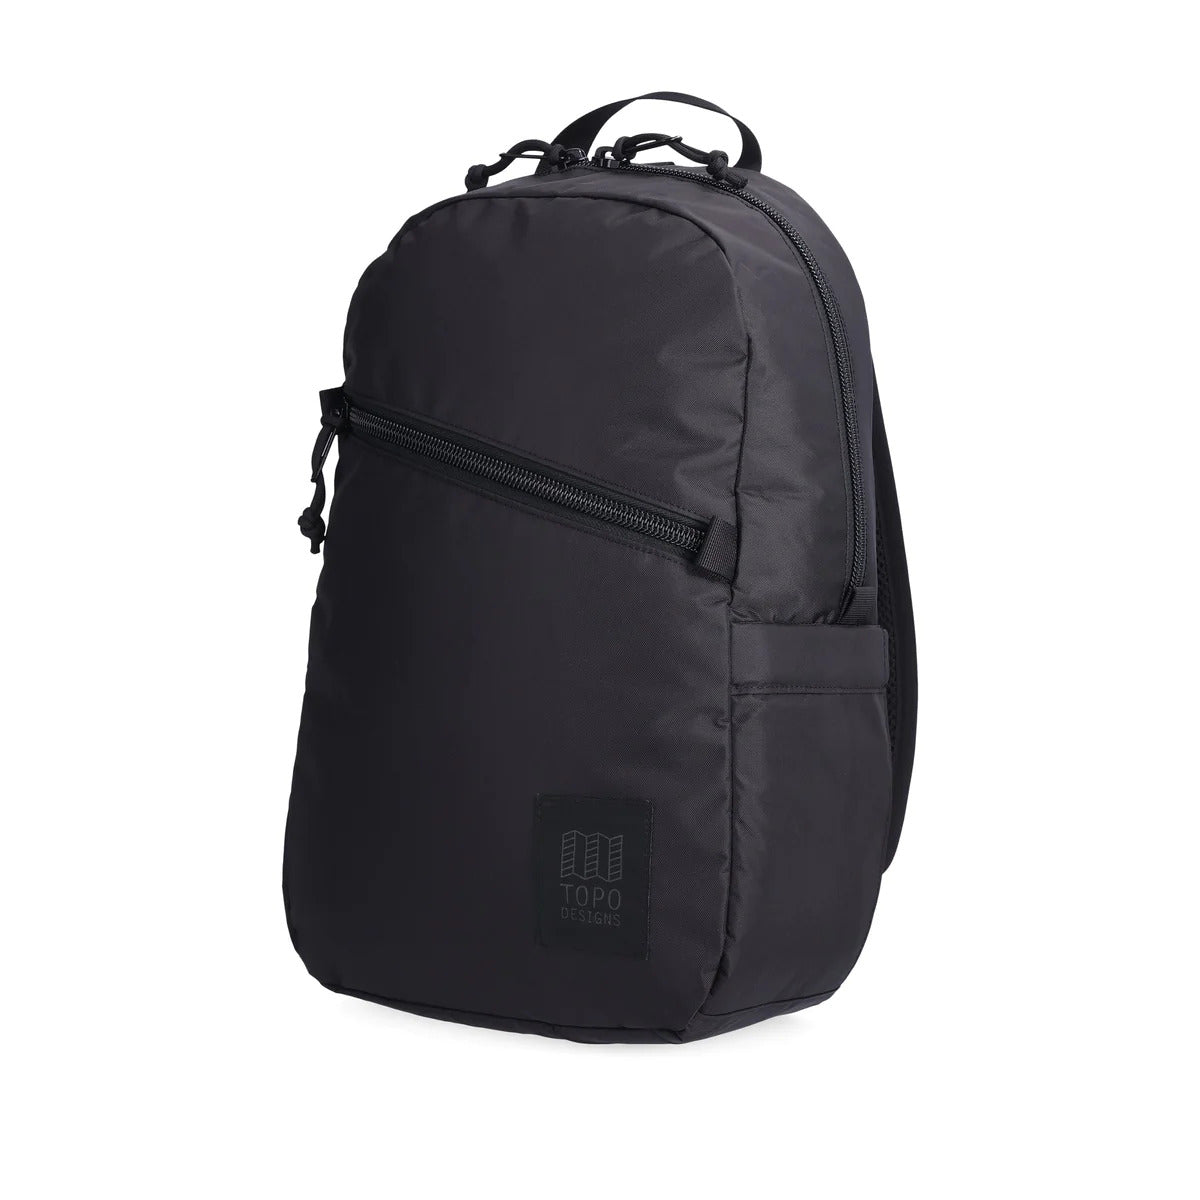 Side view of Topo Designs Light Pack in recycled "Black" nylon.